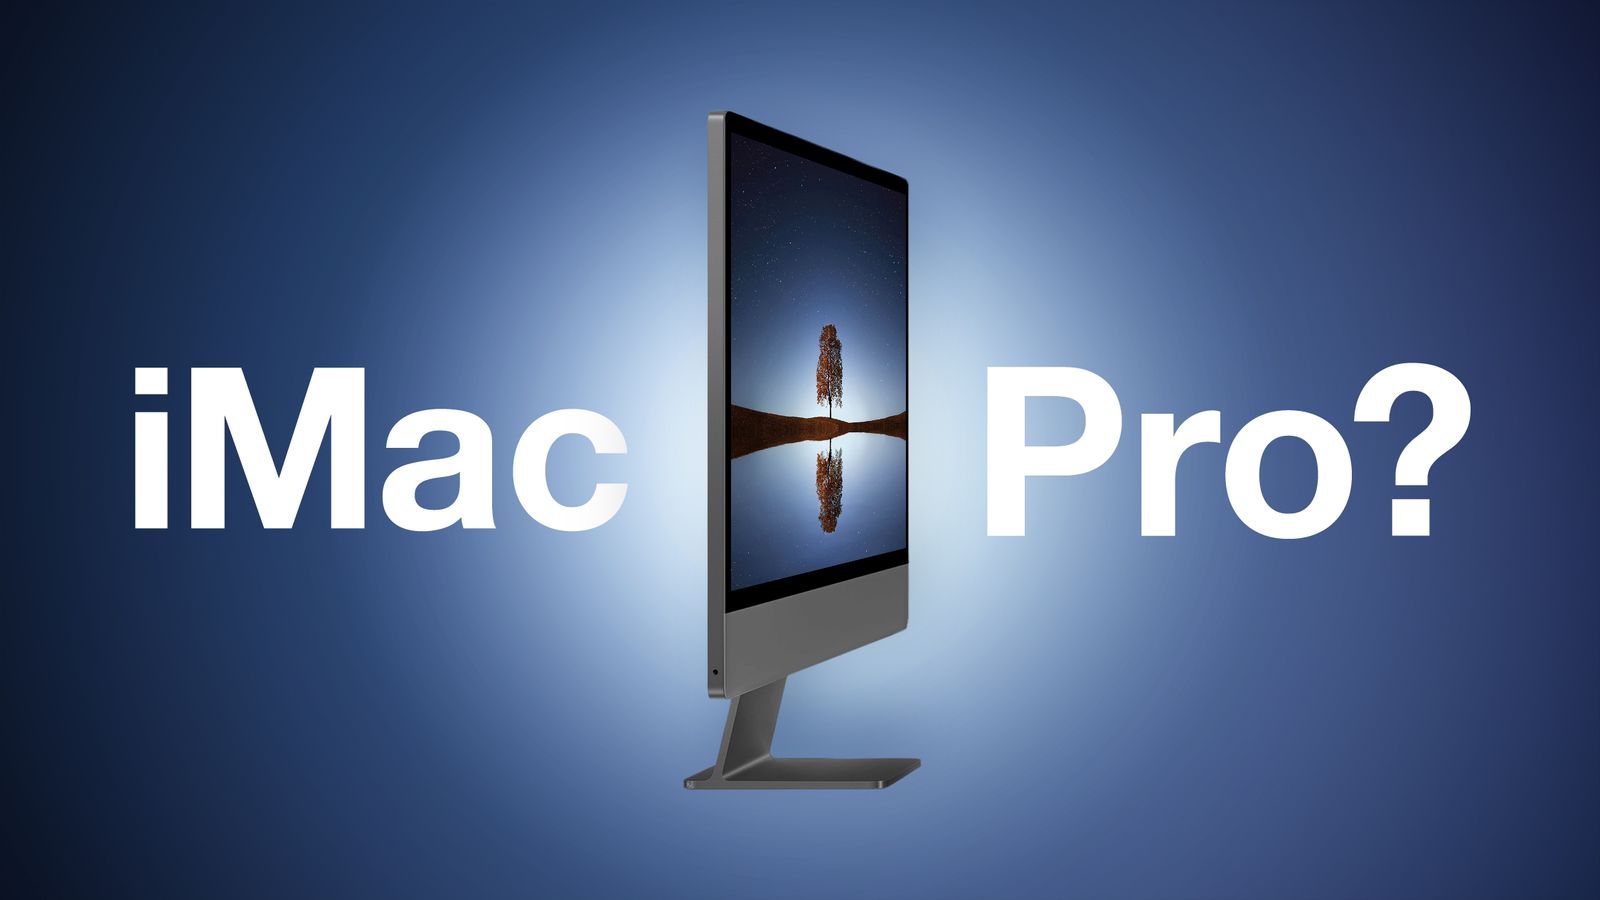 New 32-inch iMac Pro Expected in 2024 or 2025 - MacRumors